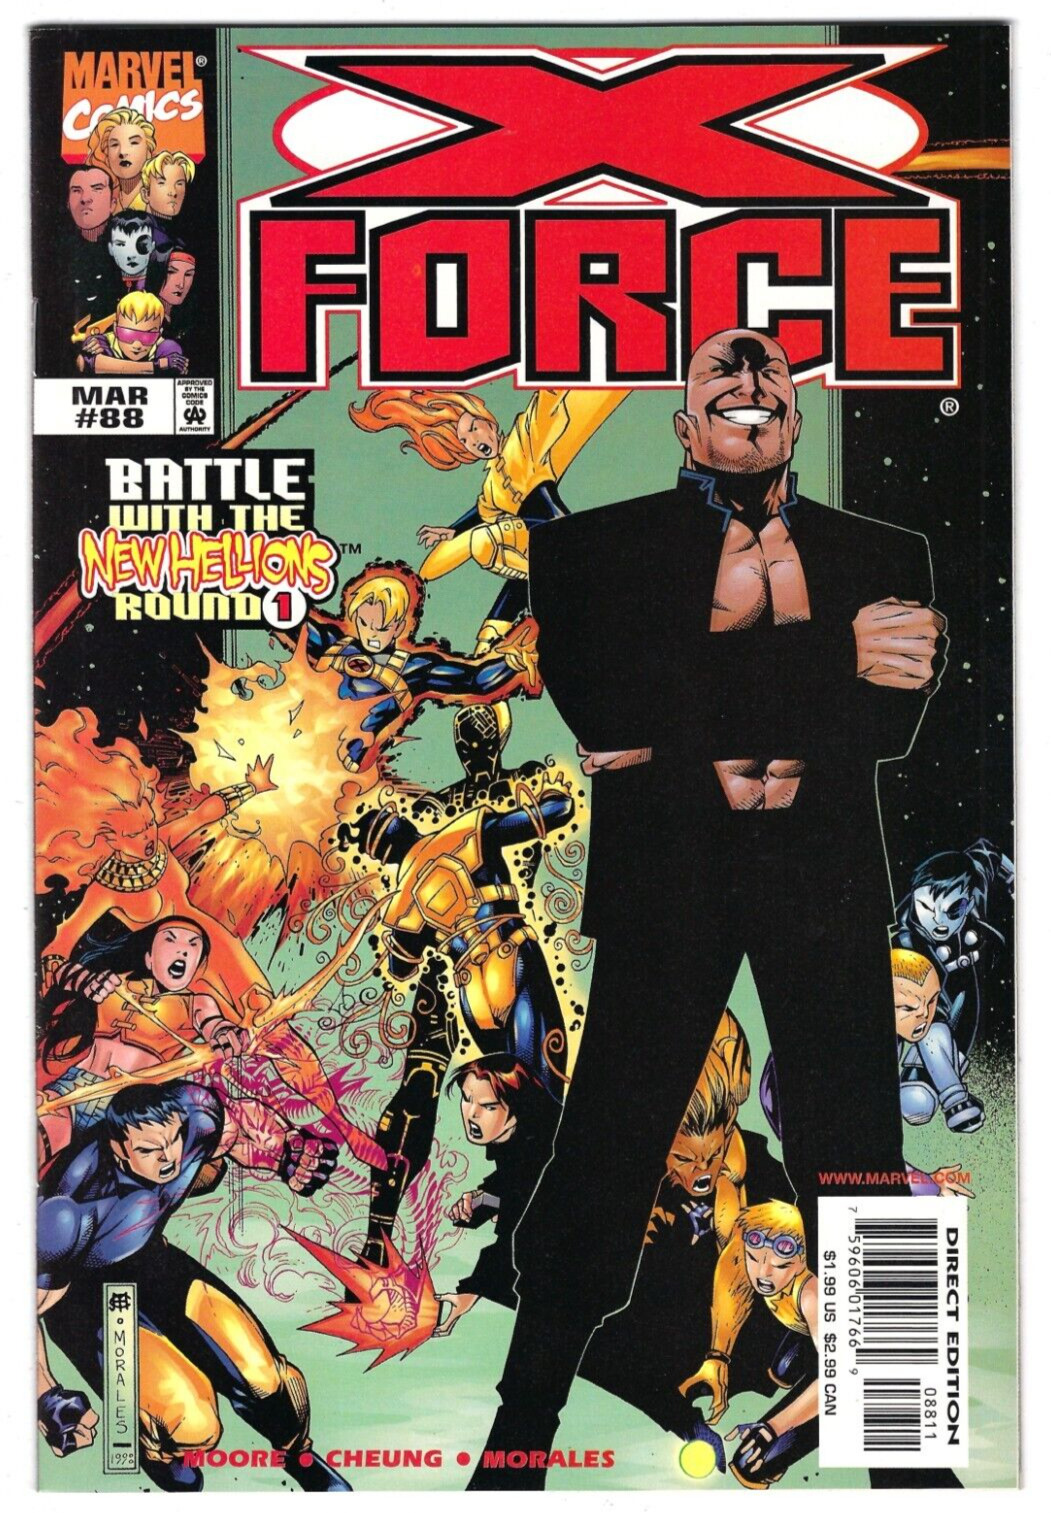 Marvel Comics X-FORCE #88 first printing cover A